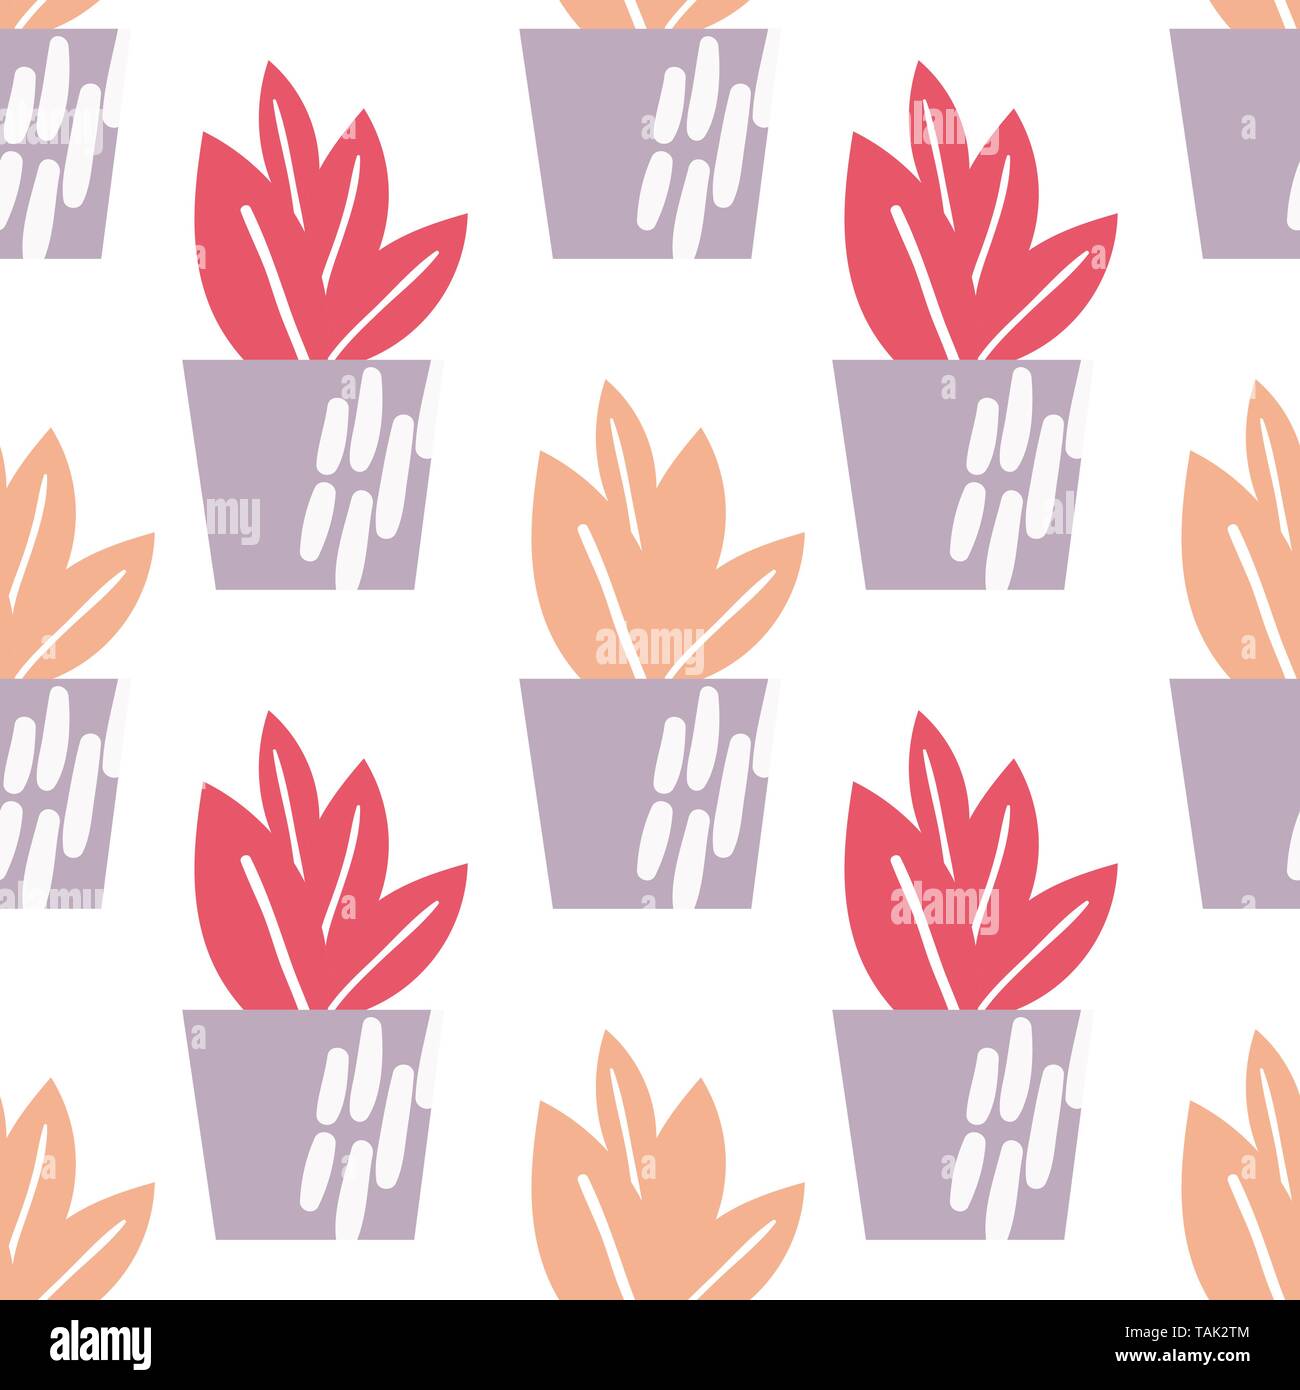 Hand drawn houseplants seamless pattern background. Flower pots and planters. Vector illustration. Perfect for textile, fabric, wrapping paper design Stock Vector